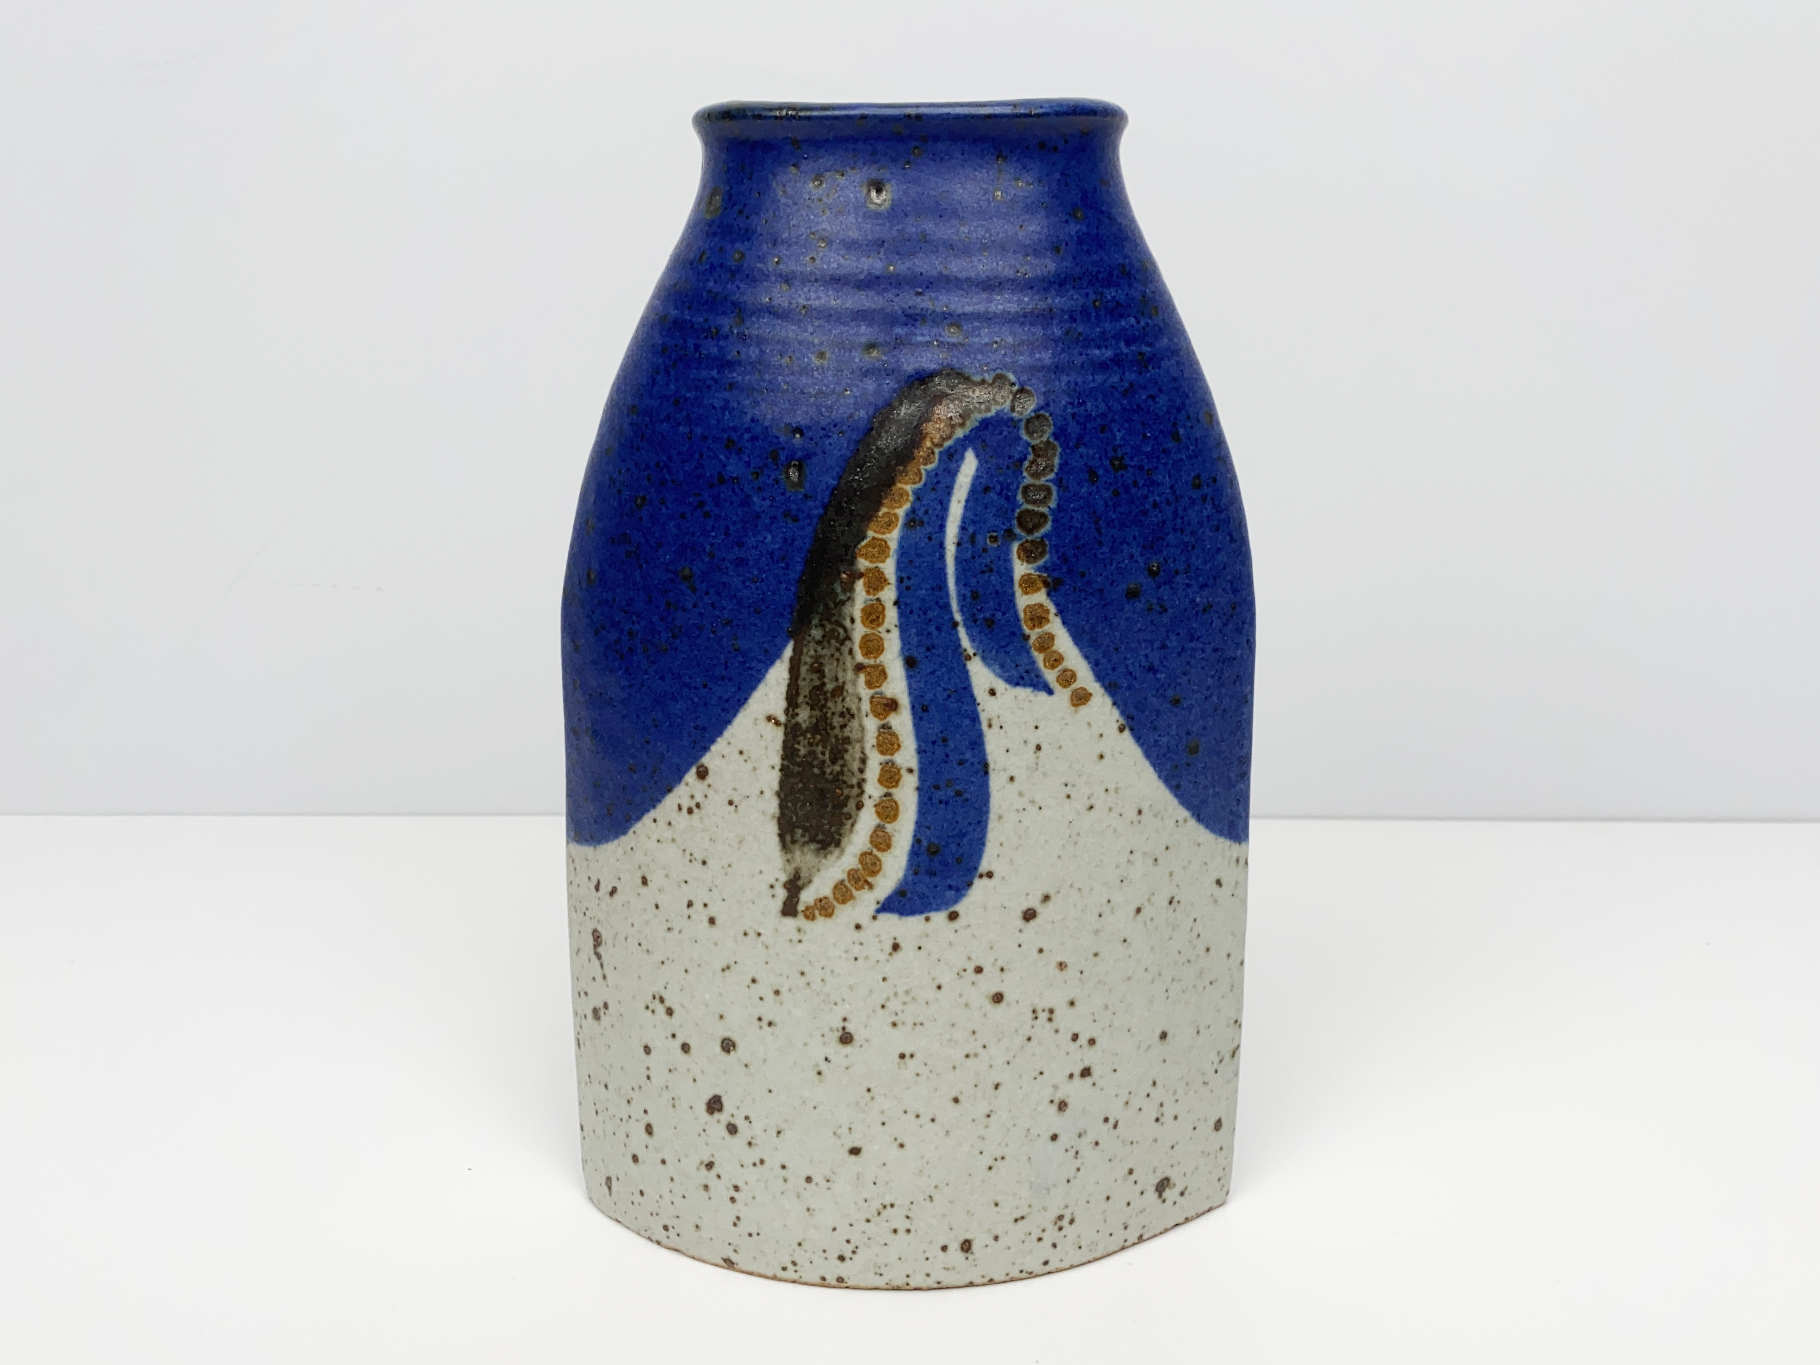 Vase, Ceramic, Stoneware, Unique Piece, painted and glazed, by Wilhelm & Elly Kuch, 1980s